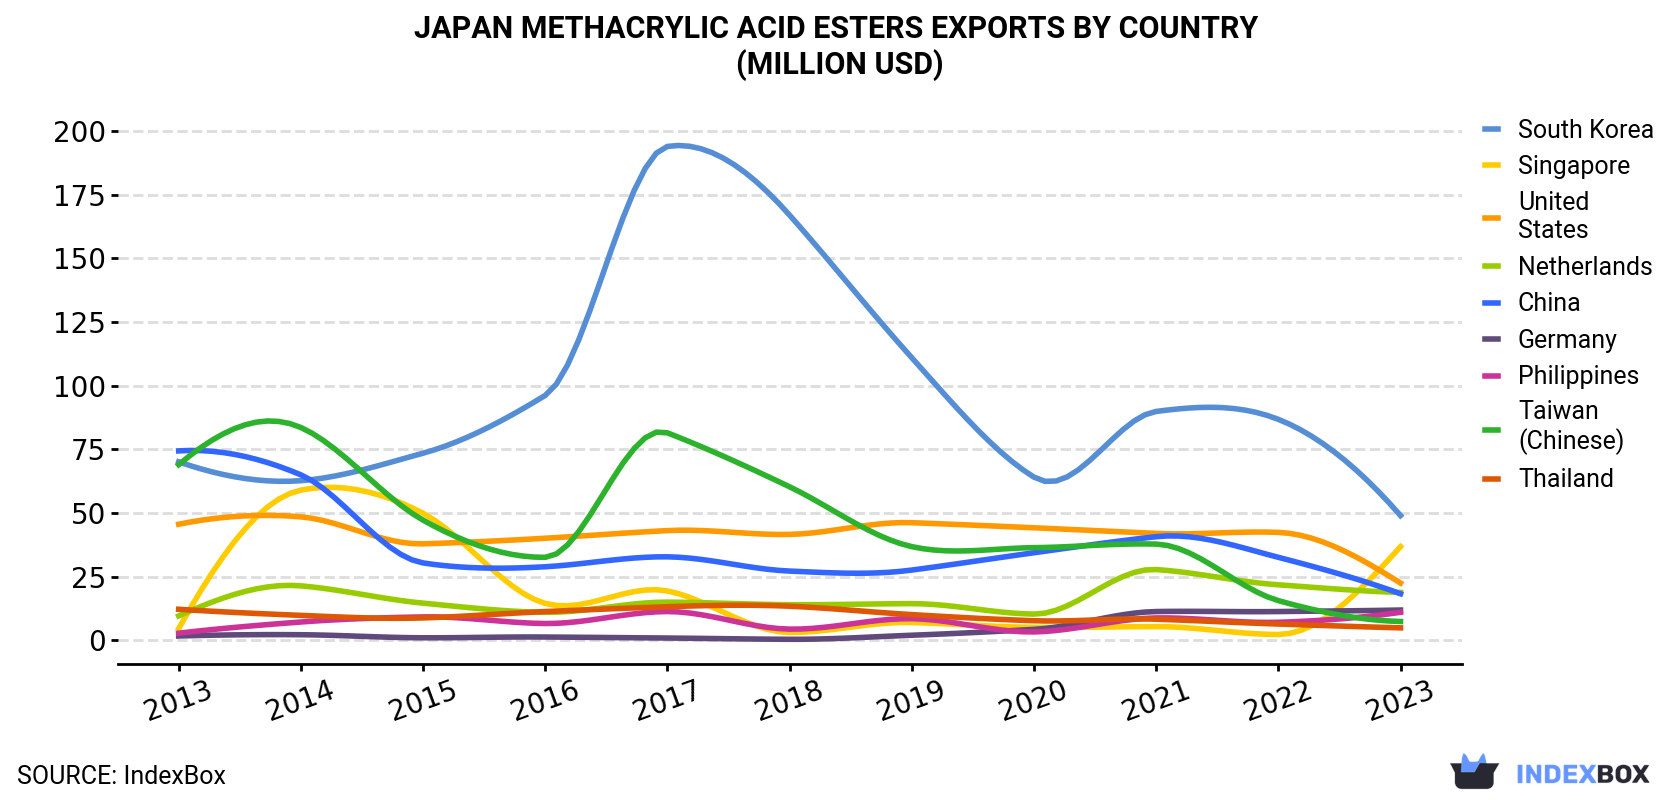 Japan Methacrylic Acid Esters Exports By Country (Million USD)